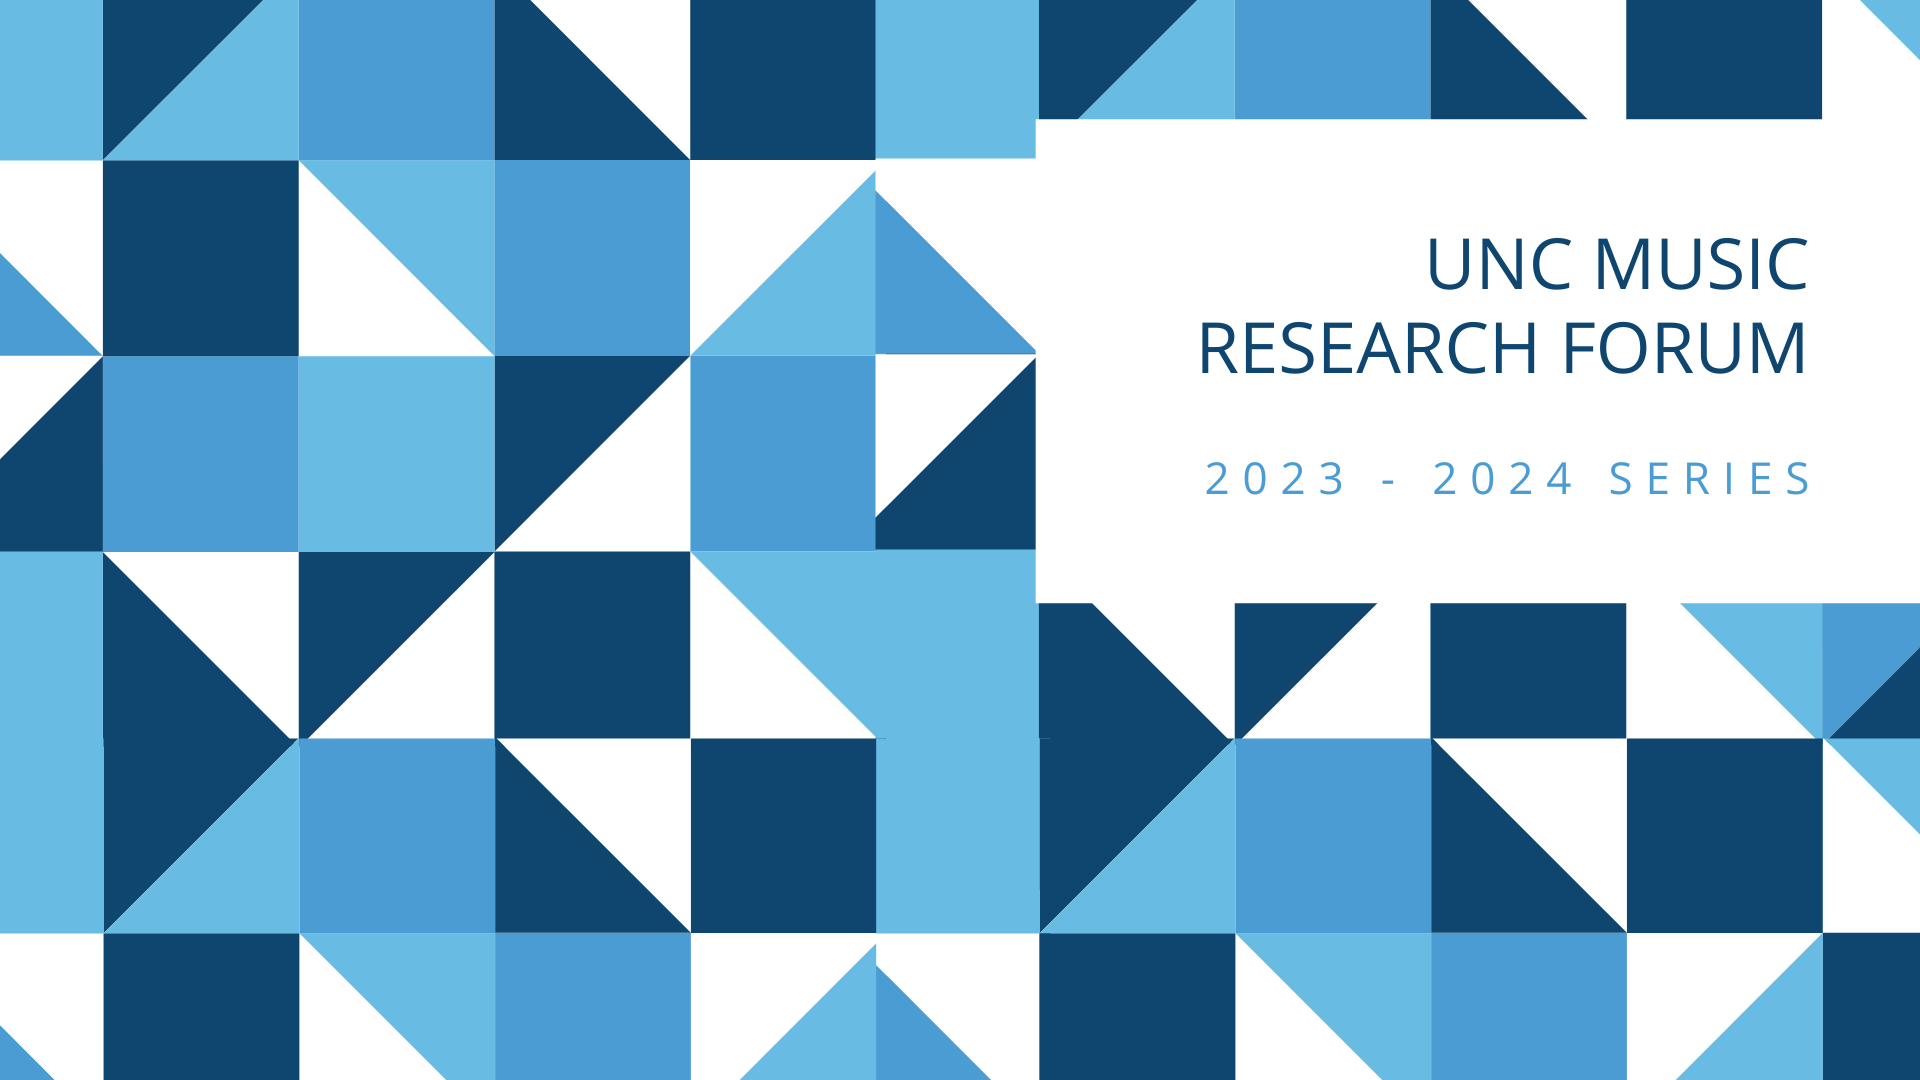 Navy, light blue, and white triangles in a varied pattern. Navy text on a white rectangle reads: UNC Music Research Forum, 2023-2024 Series"